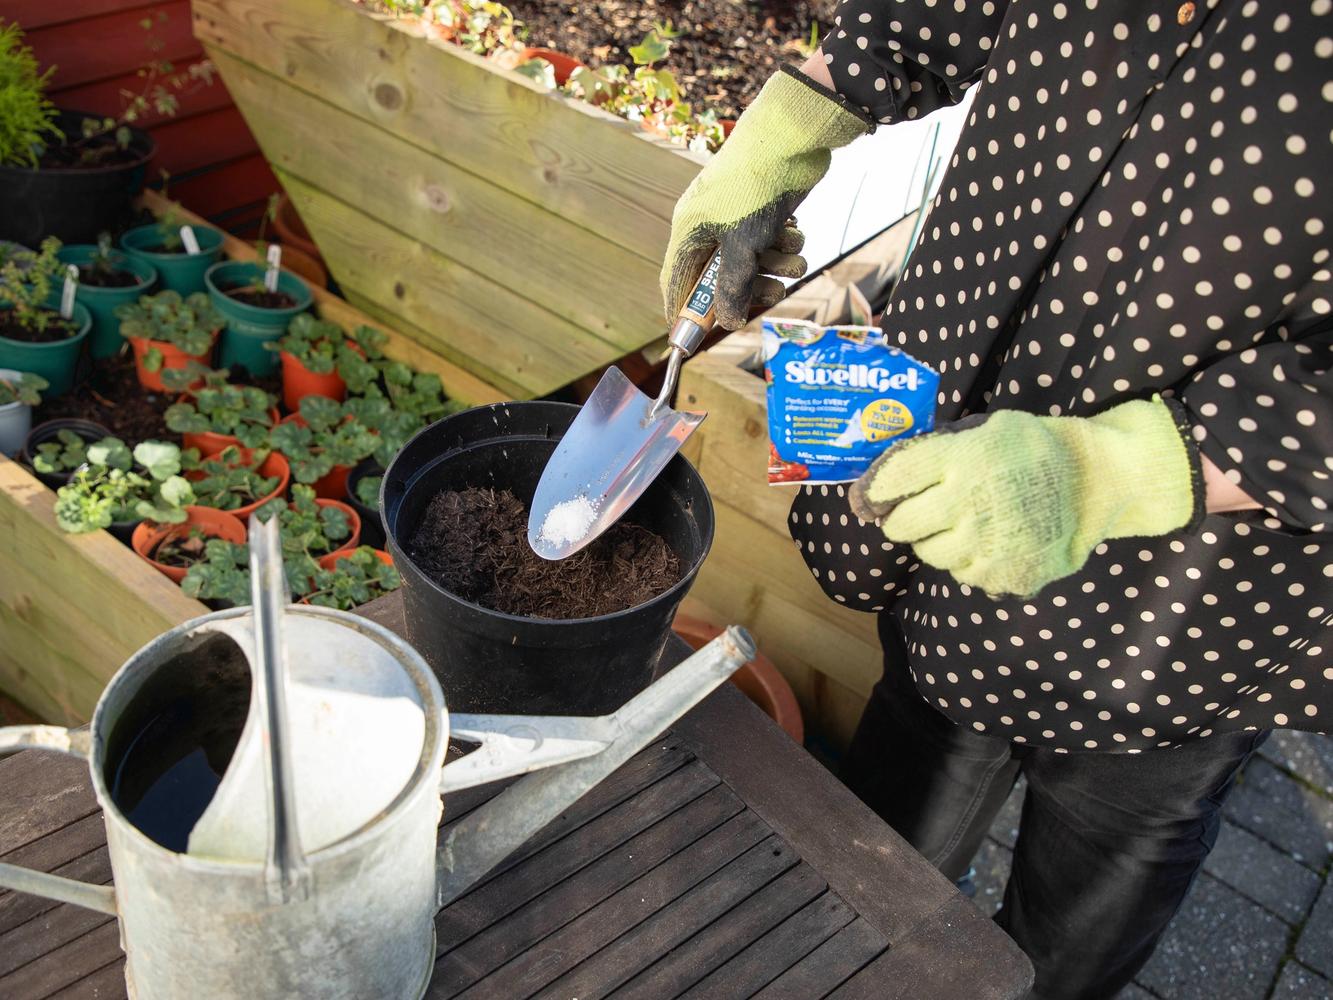 A person planting a pot with soil and a Swell Gel pouch, which reduces the need for watering as often